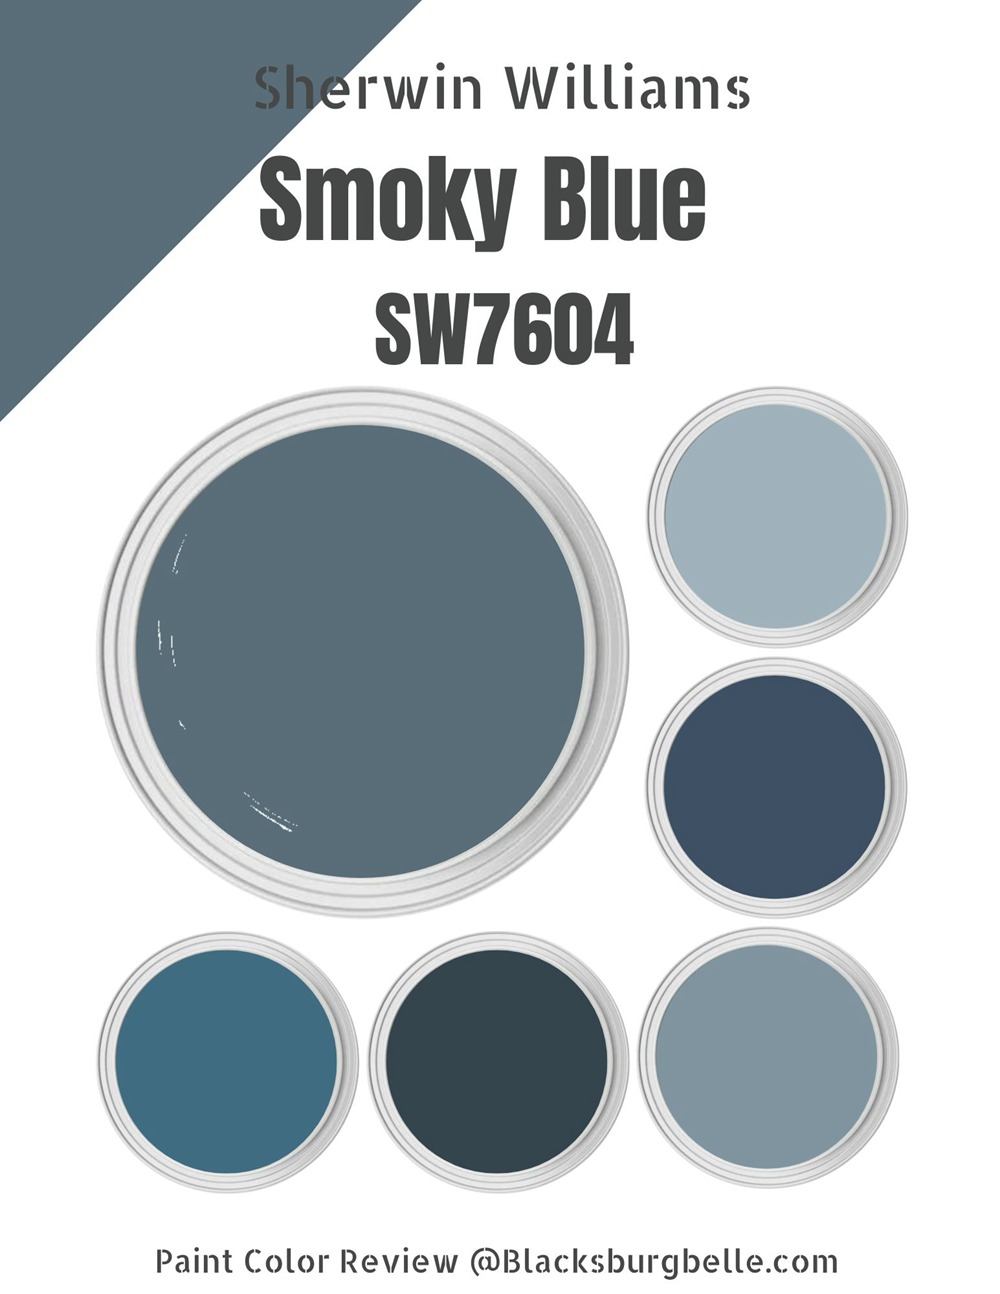 Sherwin Williams Smoky Blue (Palette, Coordinating & Inspirations)